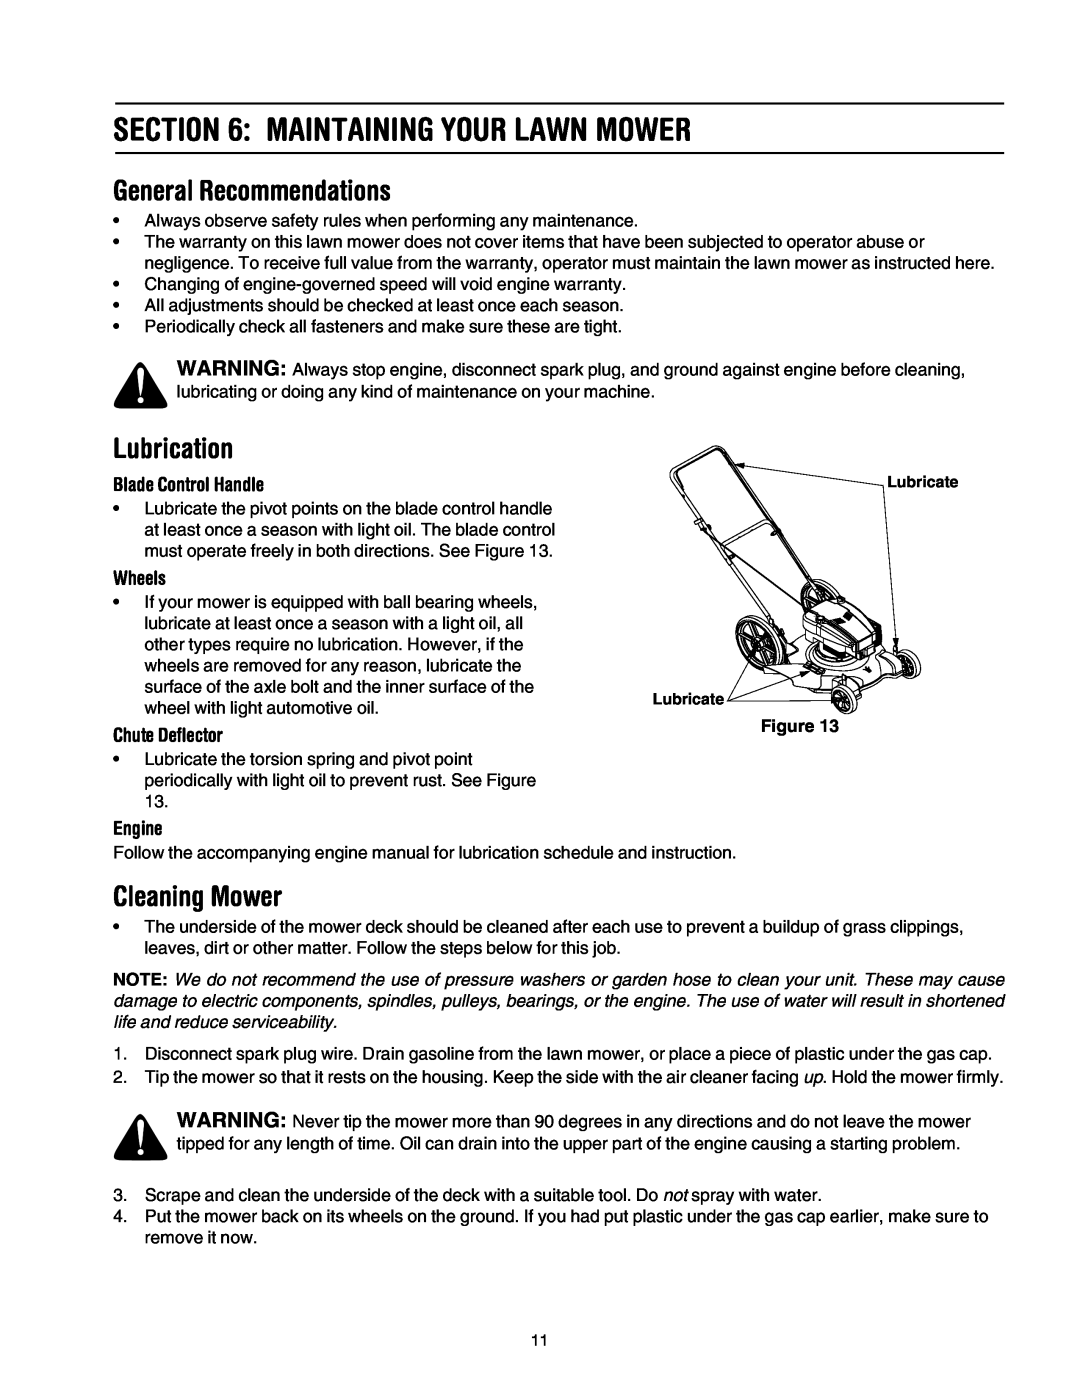 MTD 503 Maintaining Your Lawn Mower, General Recommendations, Lubrication, Cleaning Mower, Wheels, Chute Deflector, Engine 